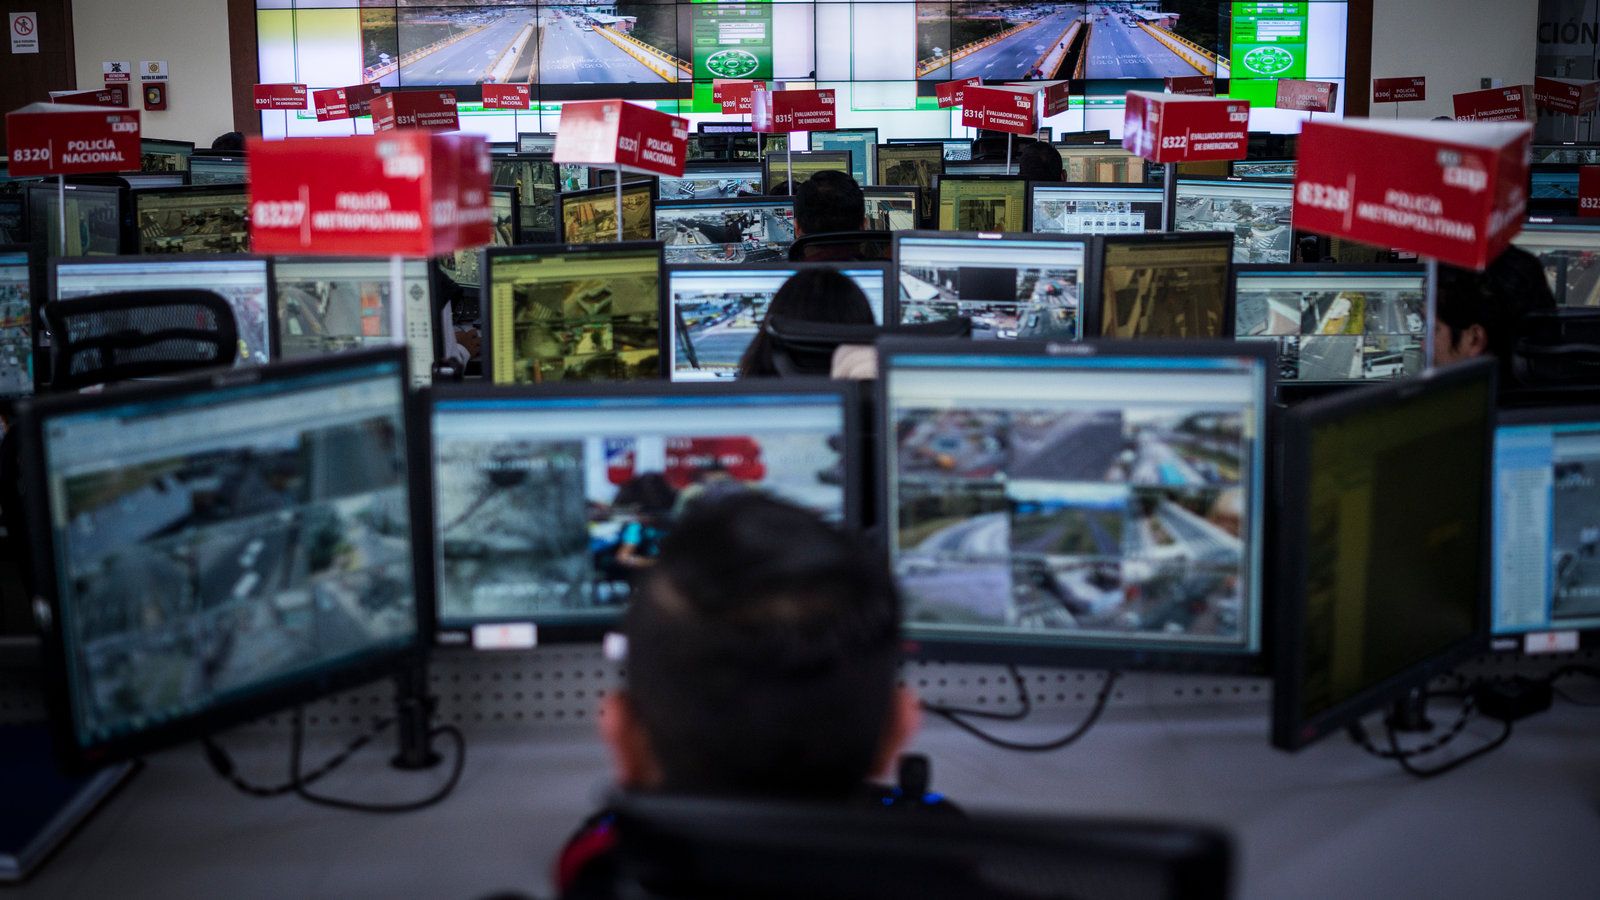 China uses 'Sophisticated surveillance technology' to target suspicious people